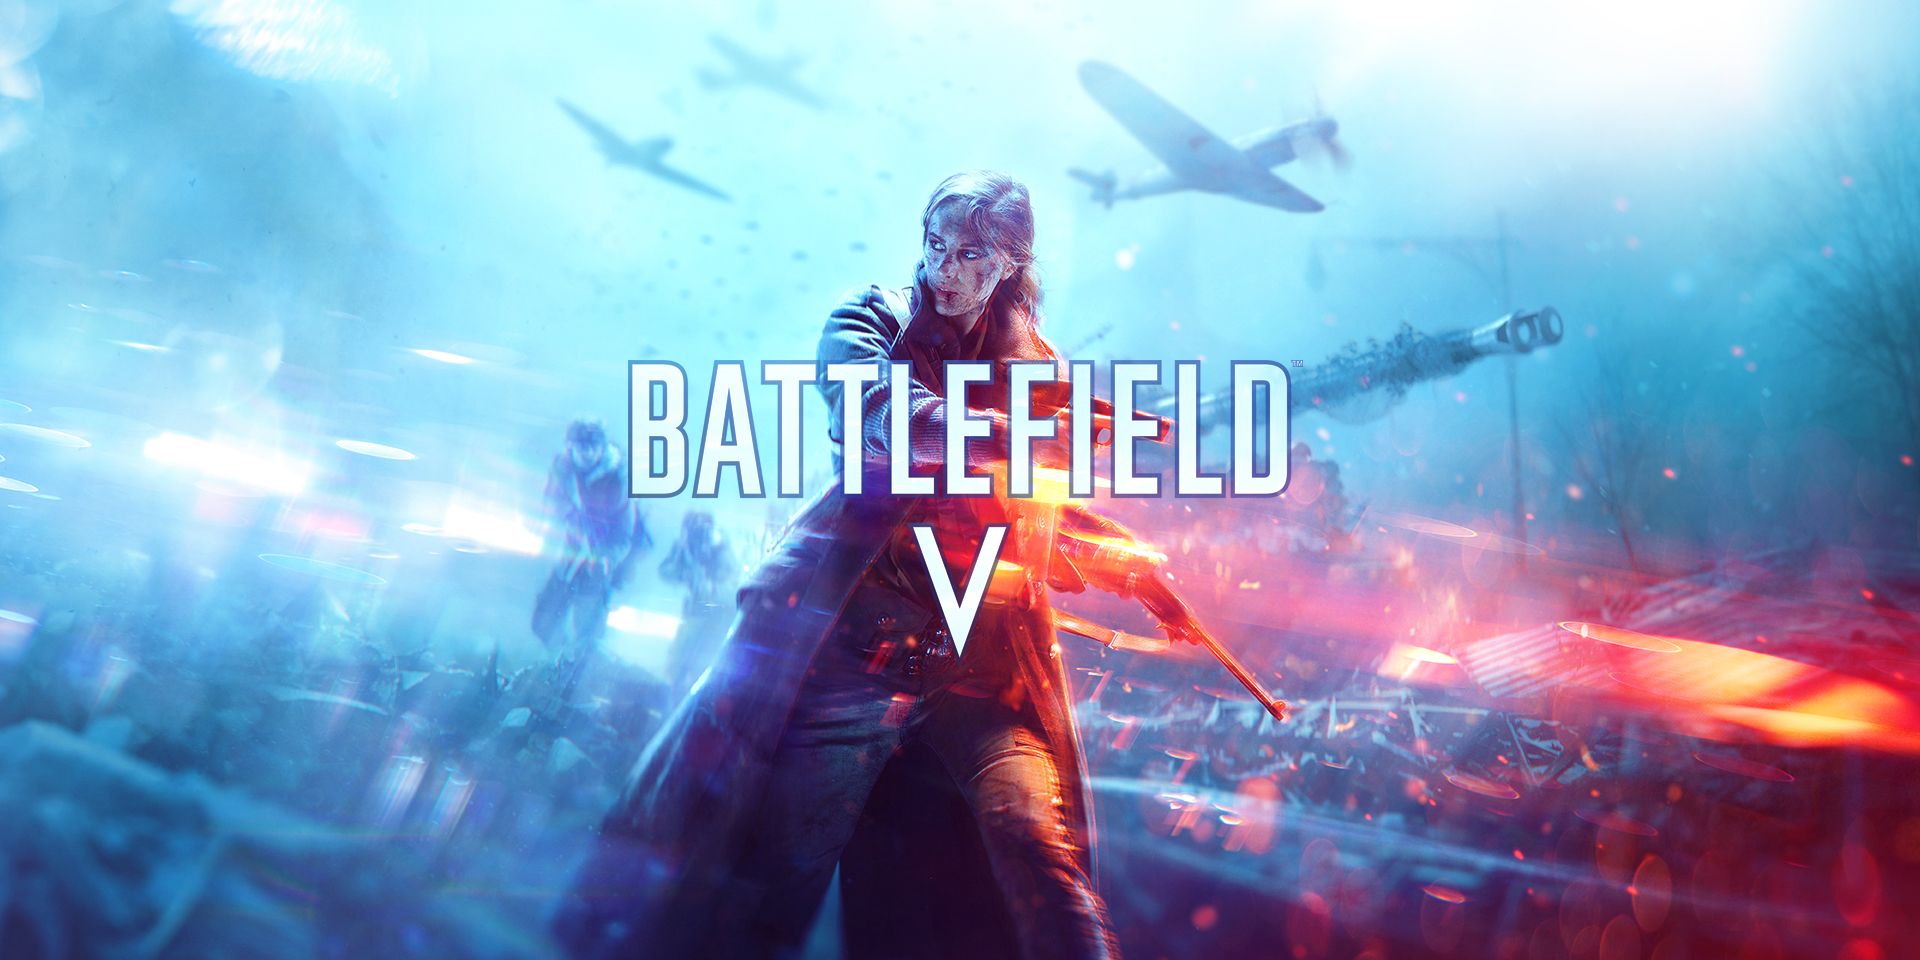 A soldier stands on a battlefield from Battlefield V